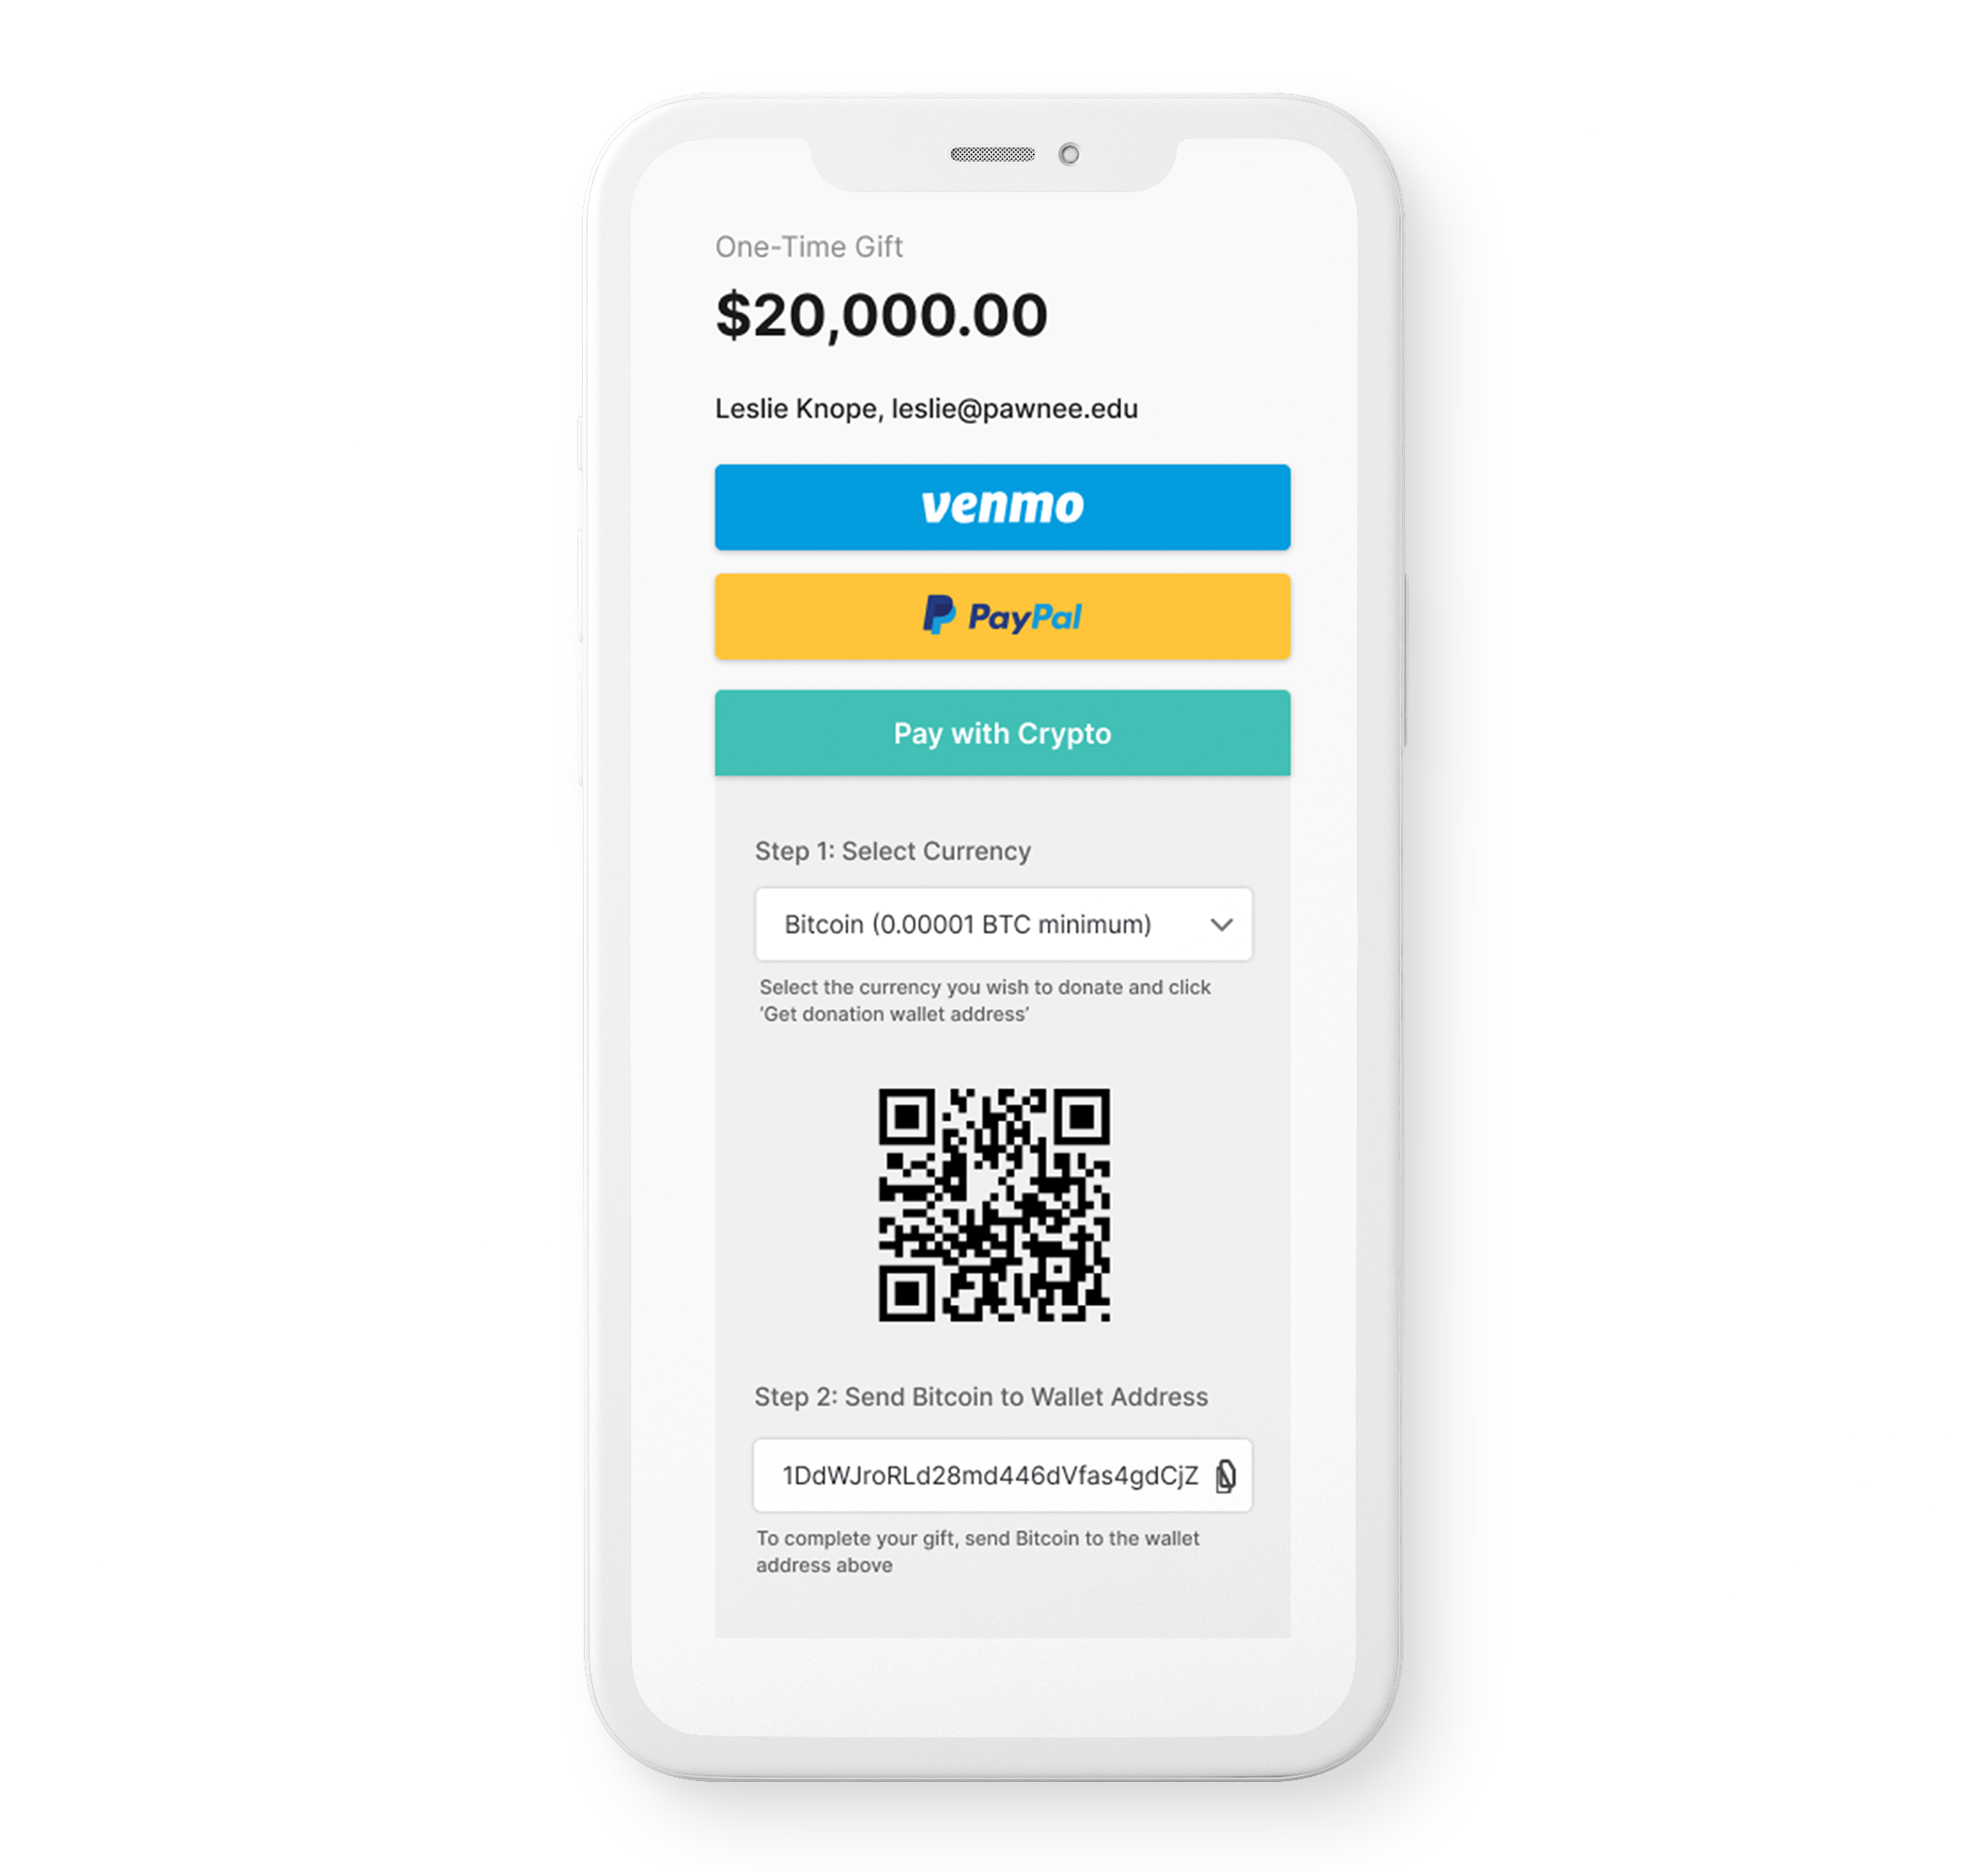 Mobile interface displaying a one-time gift of $20,000 being made using Bitcoin.